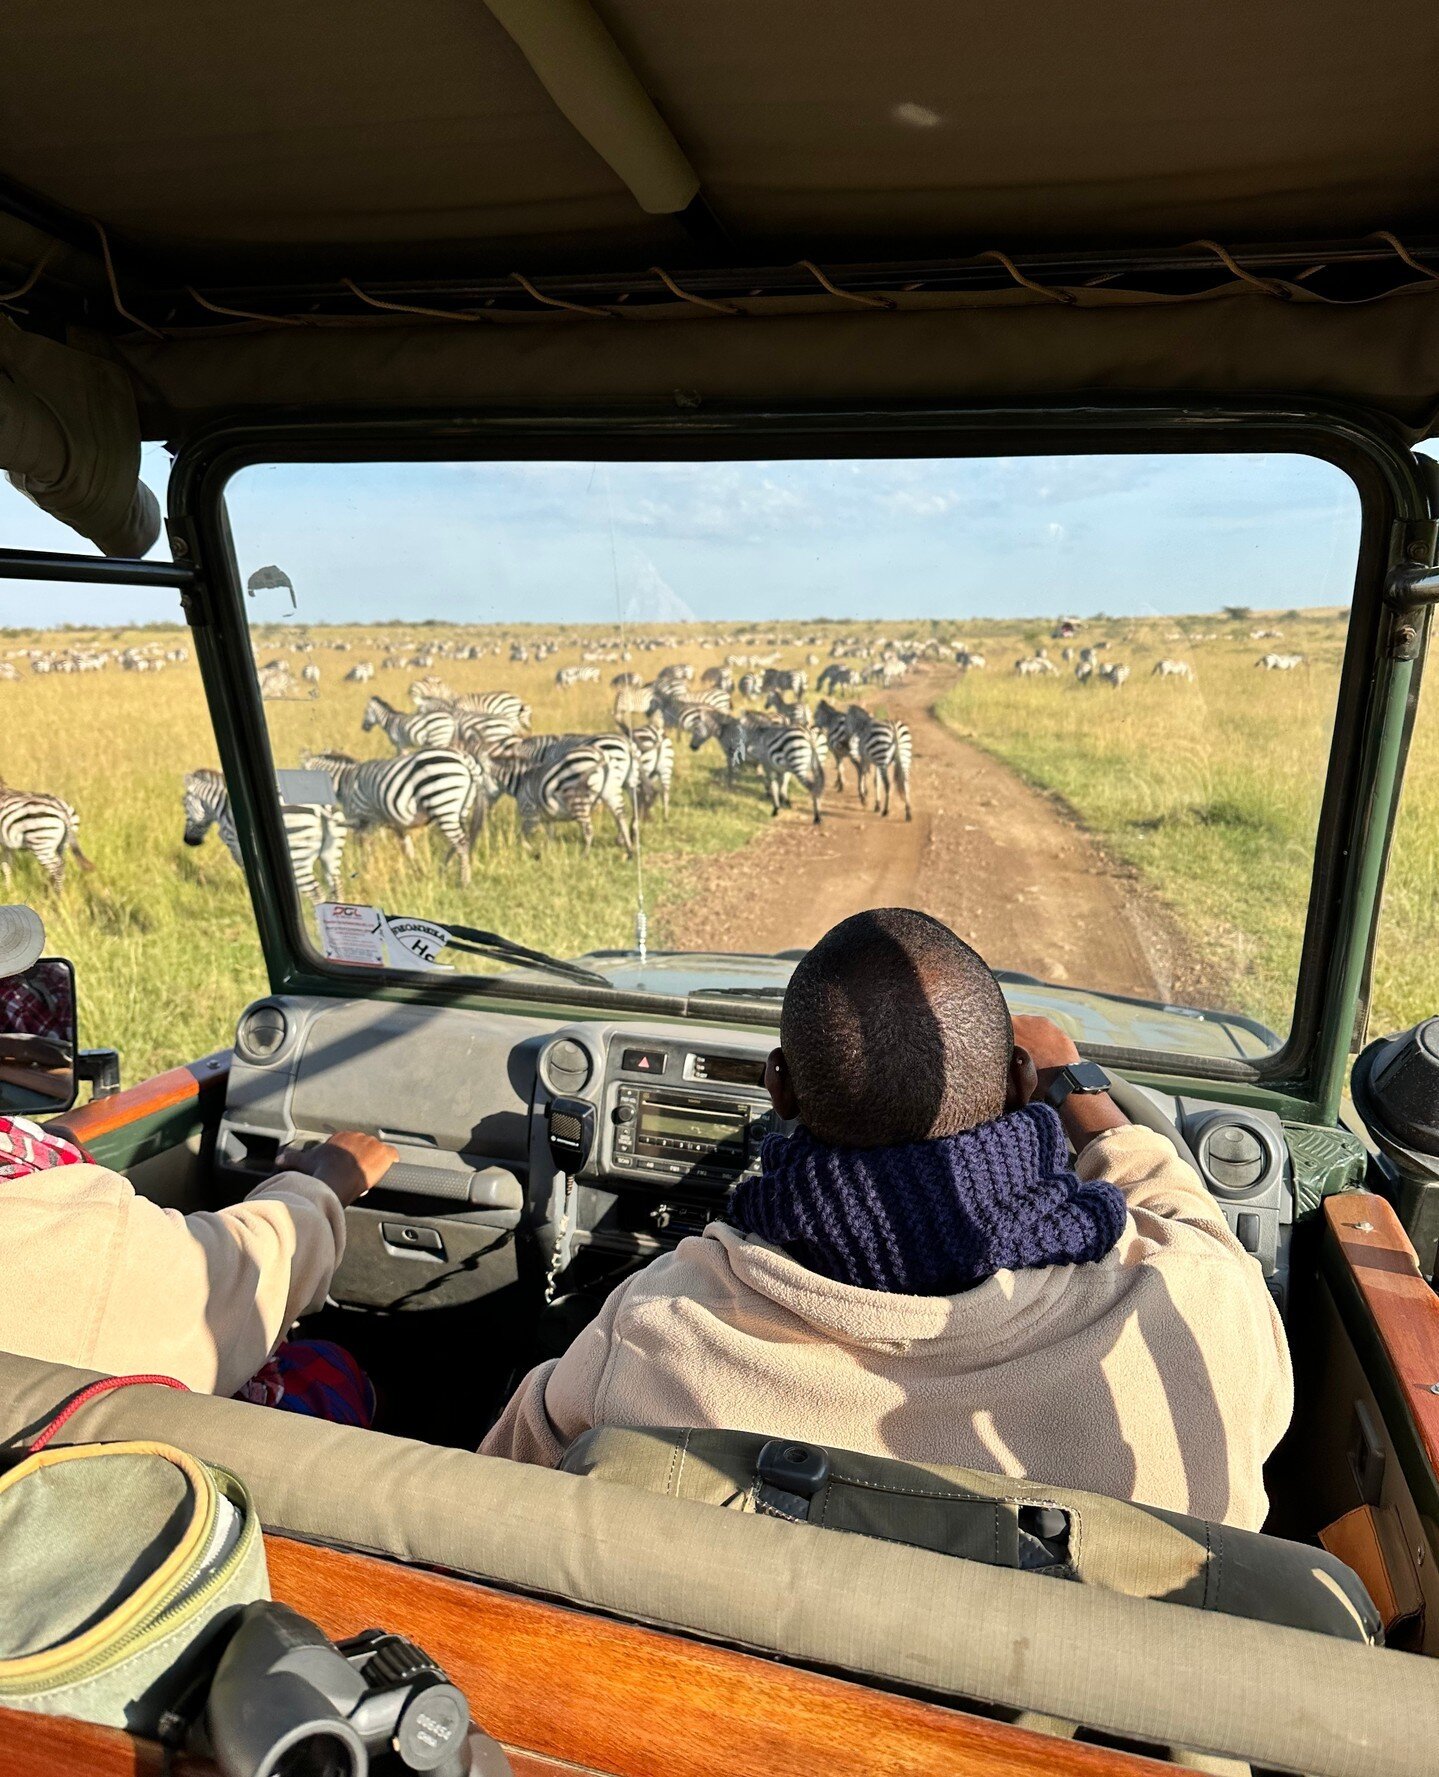 Driving through herds of zebra in the Mara North Conservancy 🦓⁠
⁠
Big shout out to Stanley from Mara Offbeat, one of the best guides i've ever had! And Offbeat camp is beautiful too. Highly recommended. ⁠
⁠